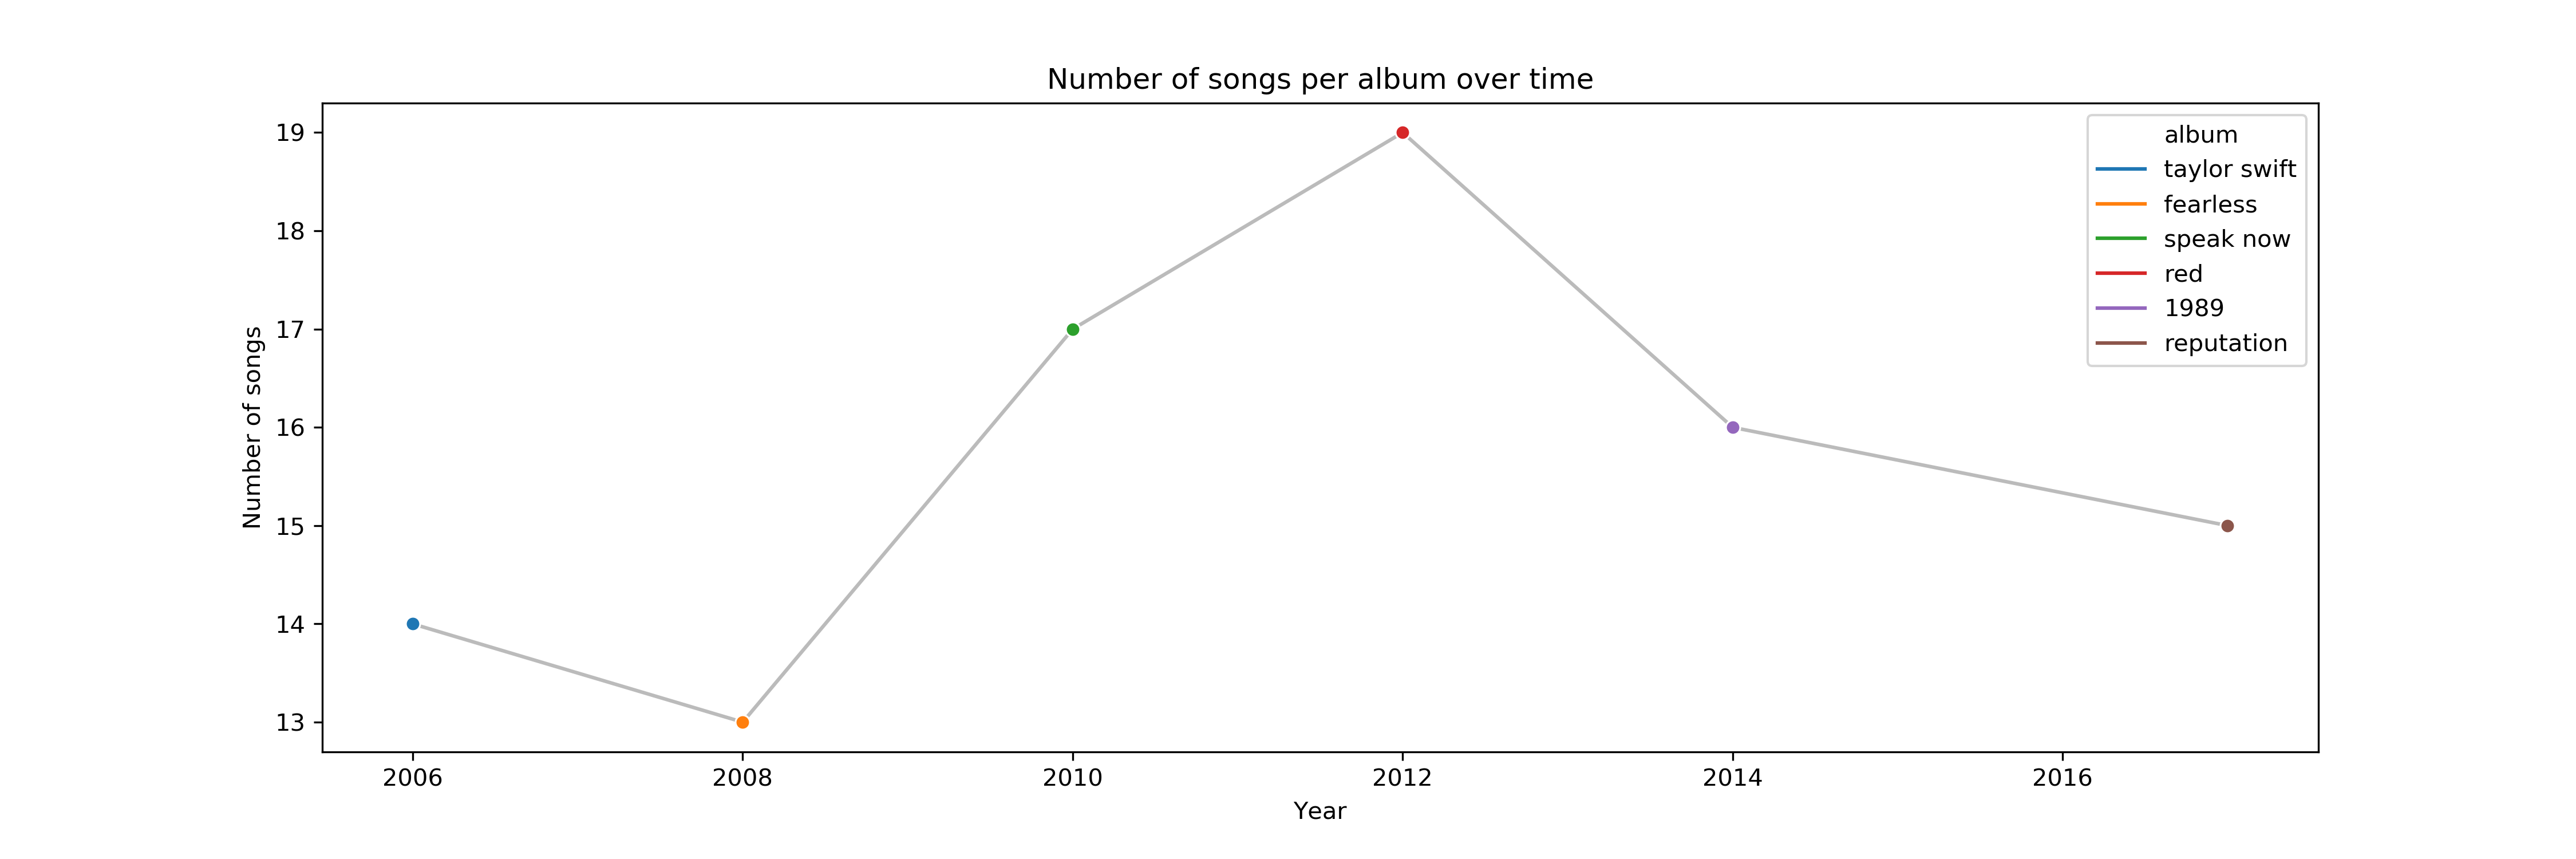 A Swift Look At Taylors Music Over The Years Louwrens